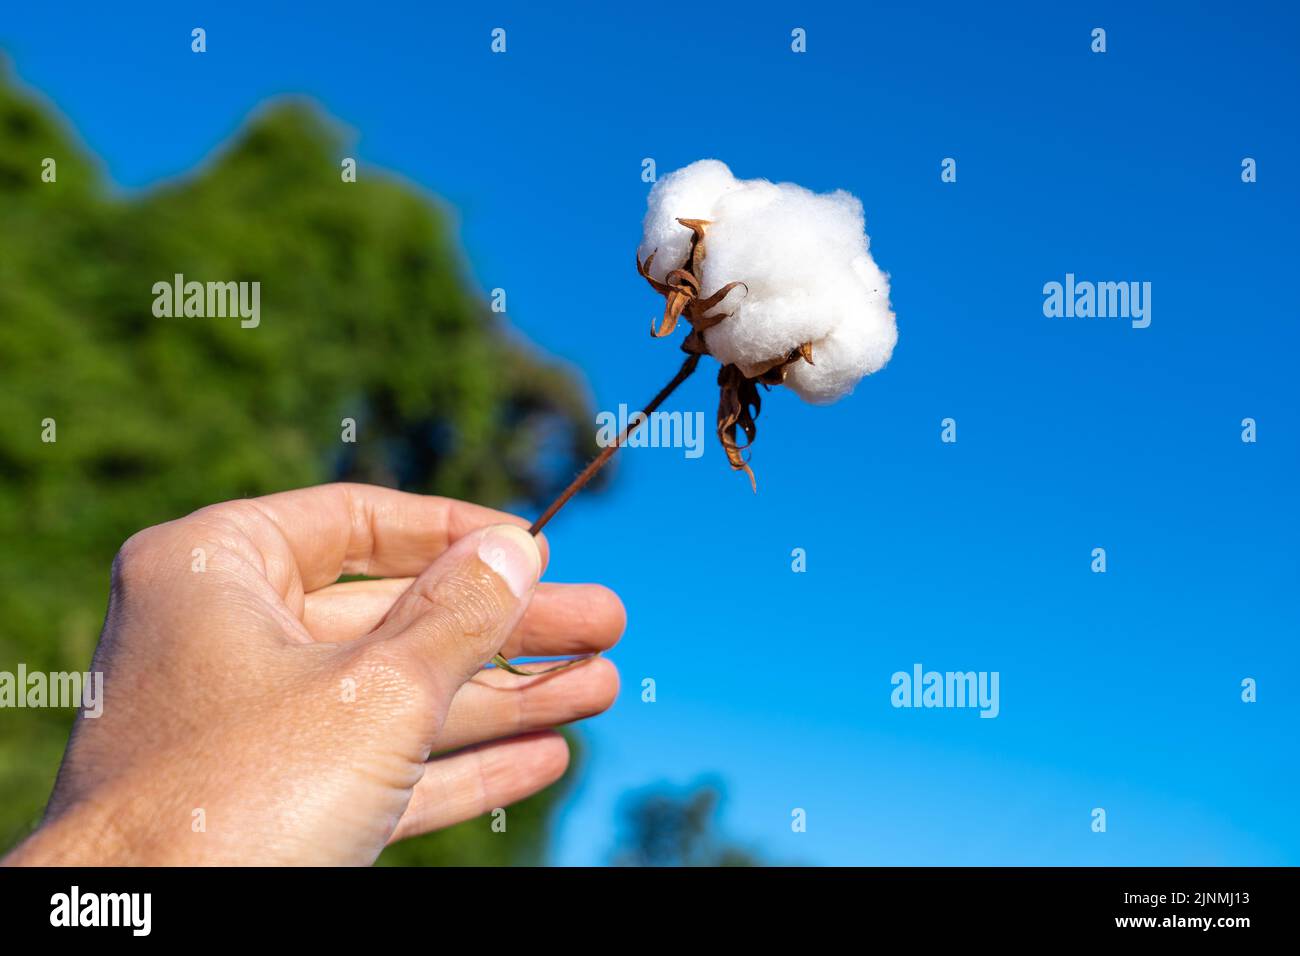 Closeup of farmer hand holding twig of cotton bud in farm plantation with blurred blue sky background. Mato Grosso, Brazil. Concept of agriculture. Stock Photo